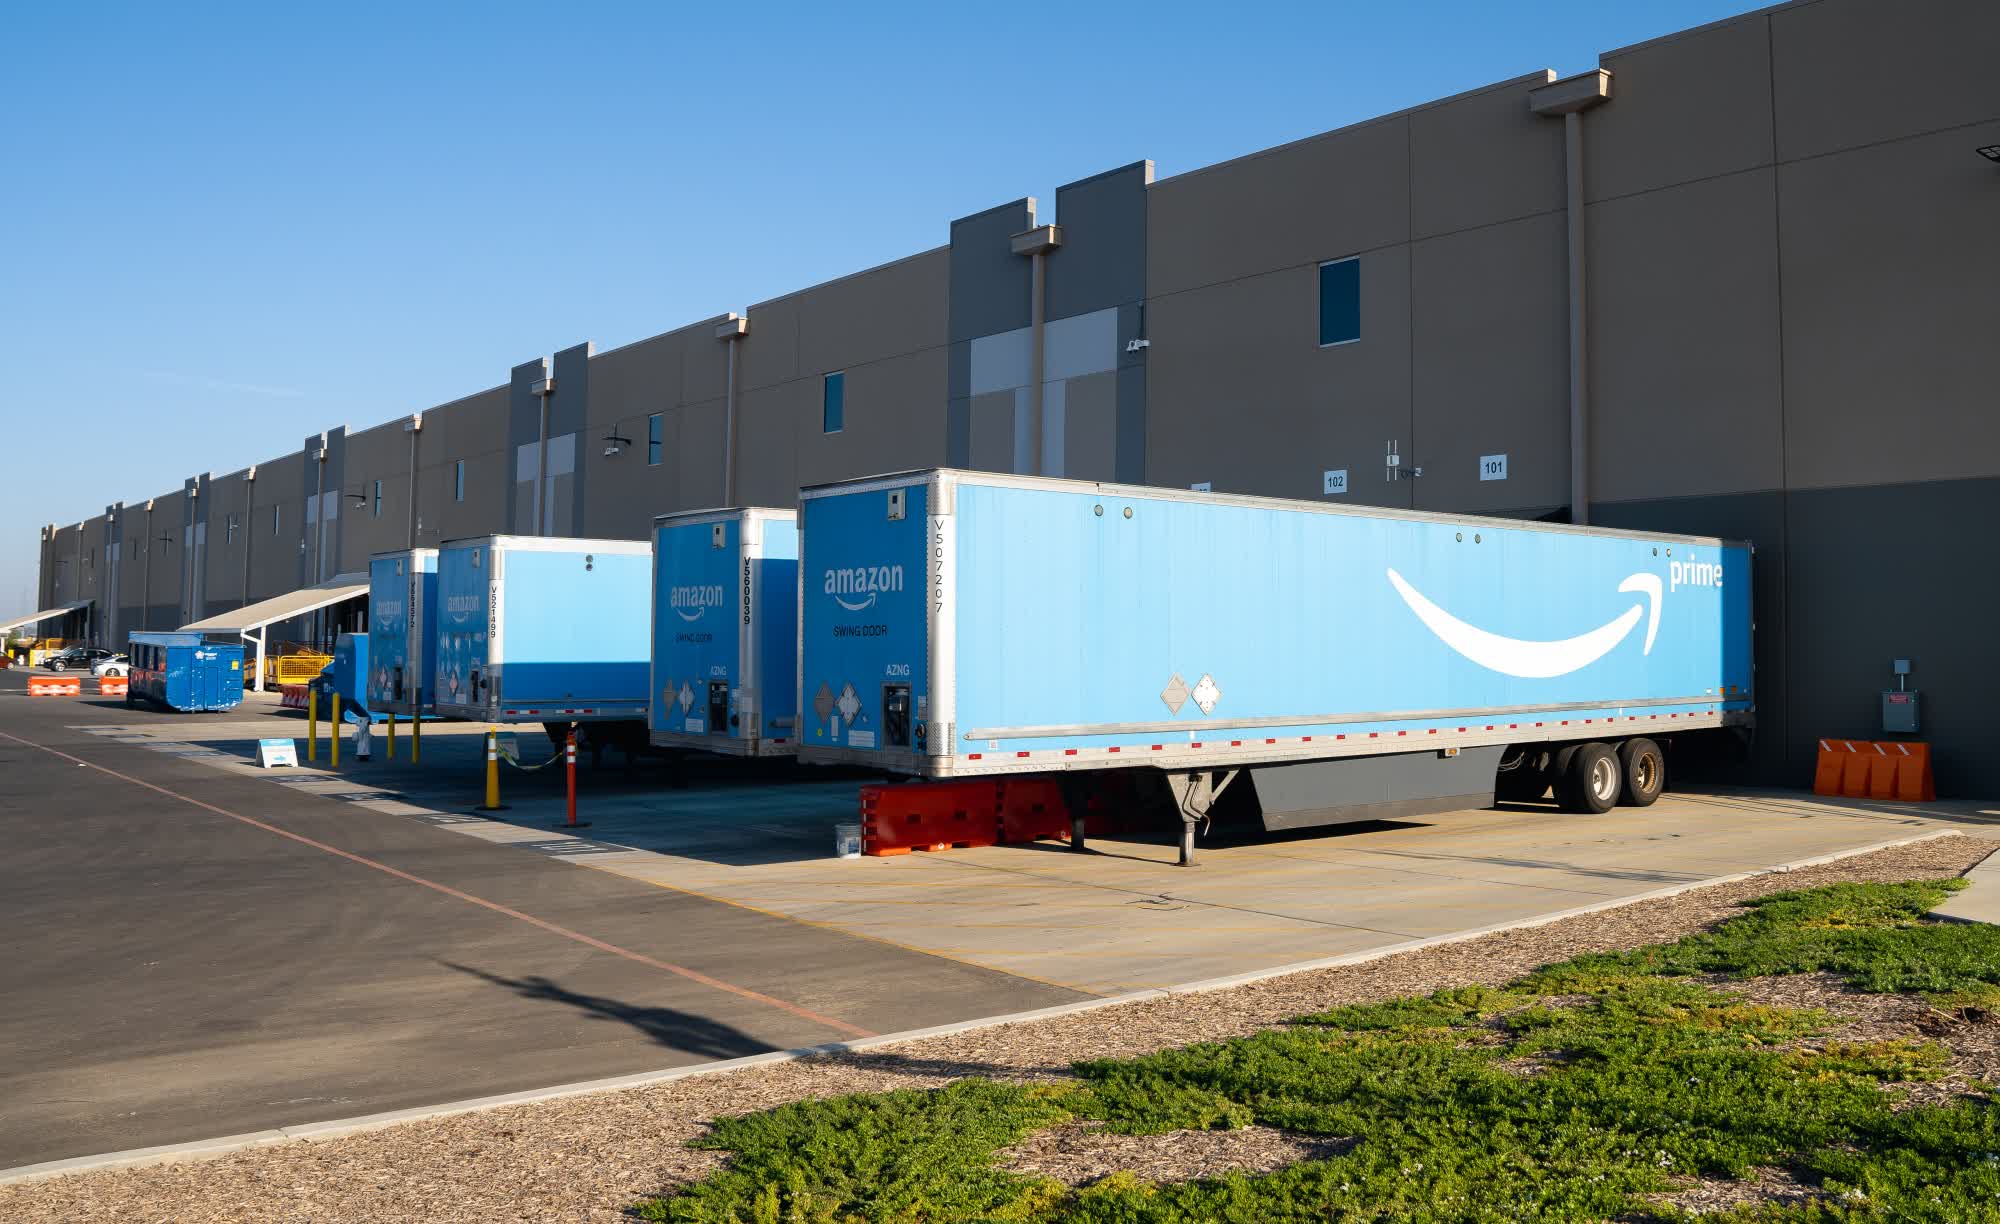 Amazon now delivers more packages than FedEx and UPS in the US